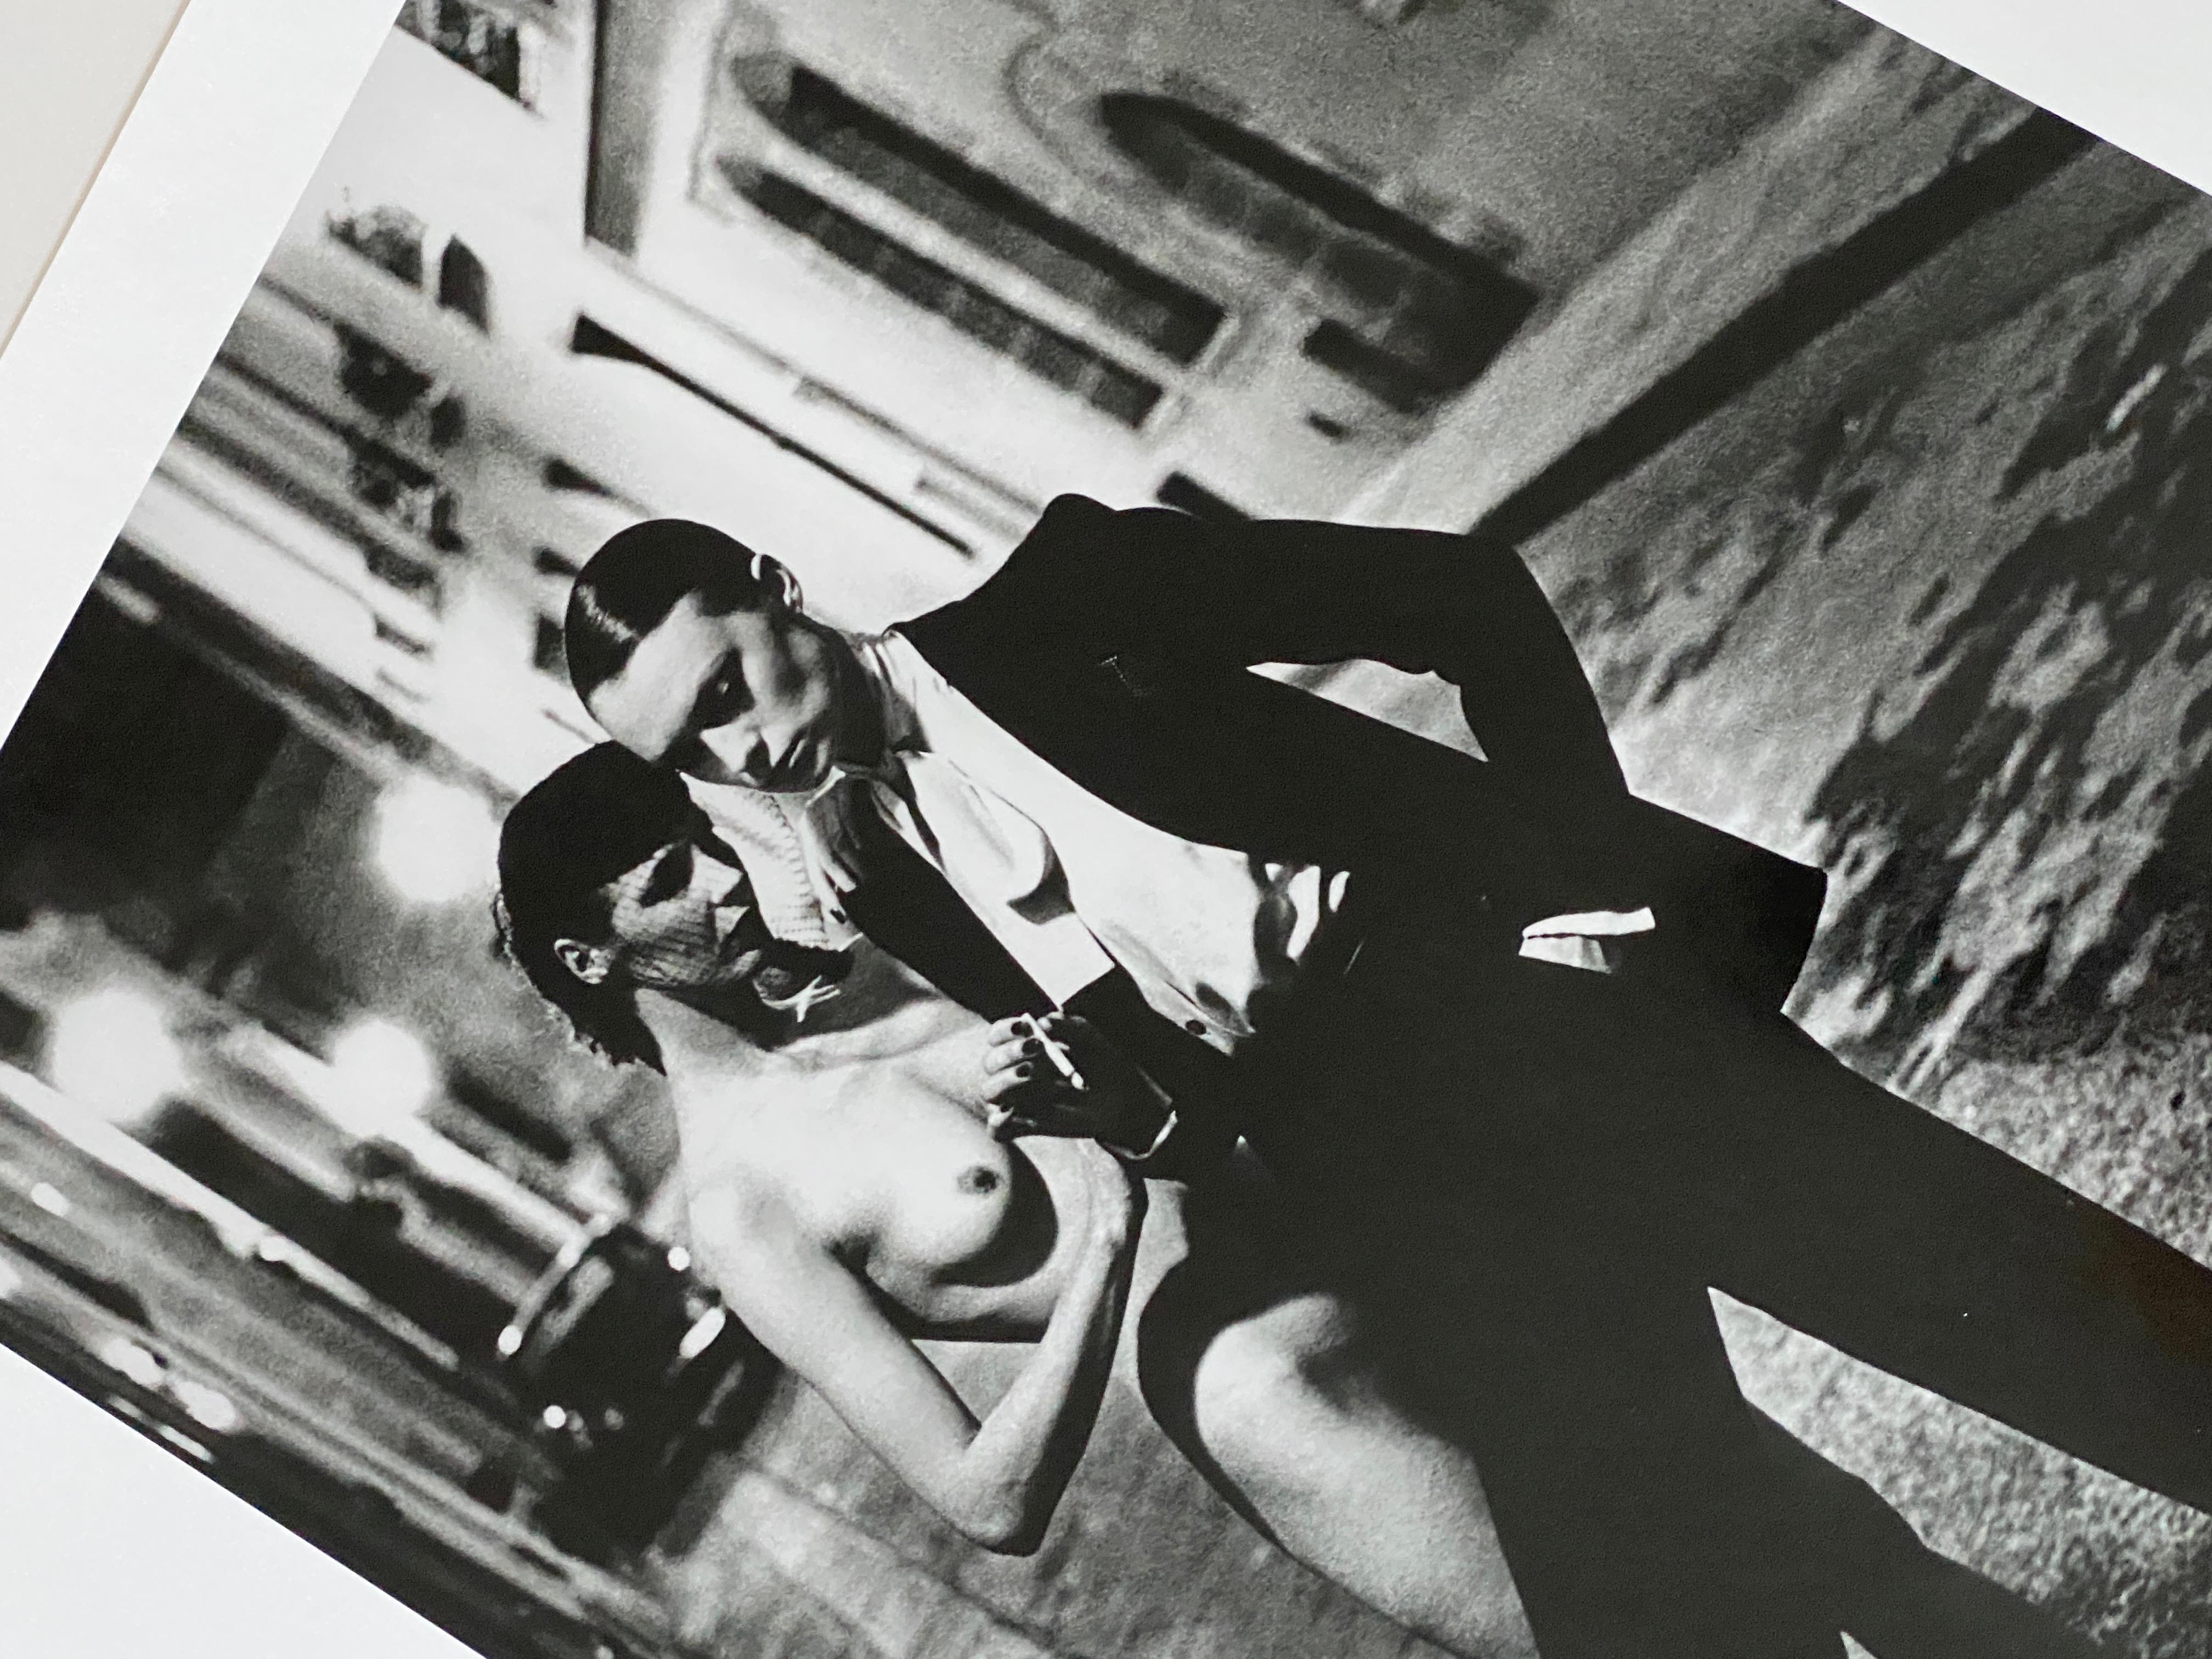 Helmut Newton, 'Rue Aubriot', 1975 Signed Original Silver Gelatin Print. 
To the trade pricing
Black and White Photography / Contemporary Photography

HELMUT NEWTON (1920–2004)
Yves St. Laurent, Rue Aubriot, French Vogue, Paris, 1975
gelatin silver